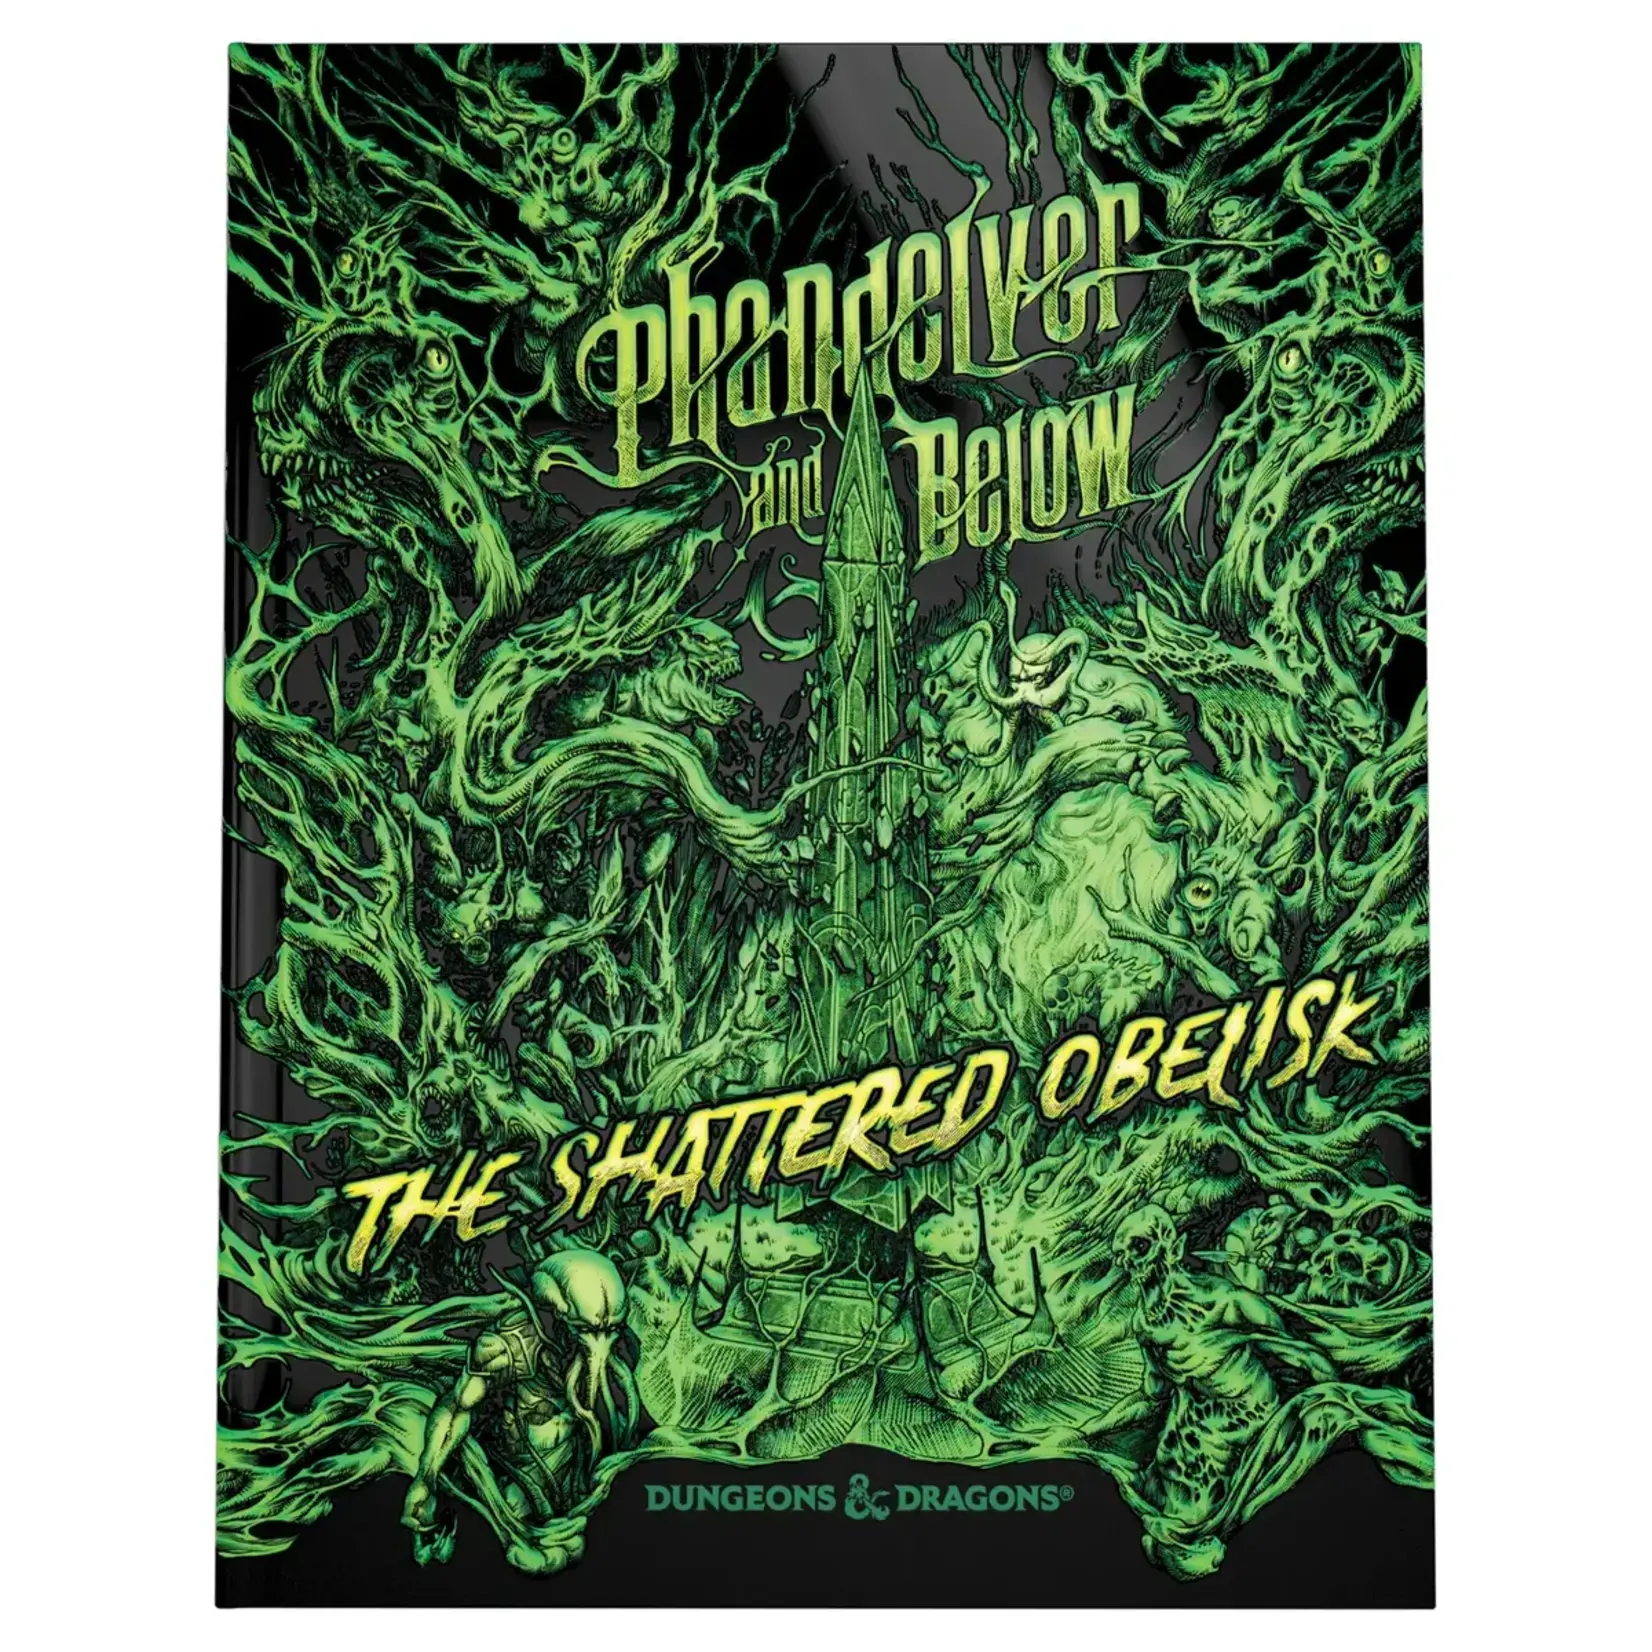 Wizards of the Coast Dungeons & Dragons RPG: Phandelver And Below - The Shattered Obelisk Alt Cover (HC)